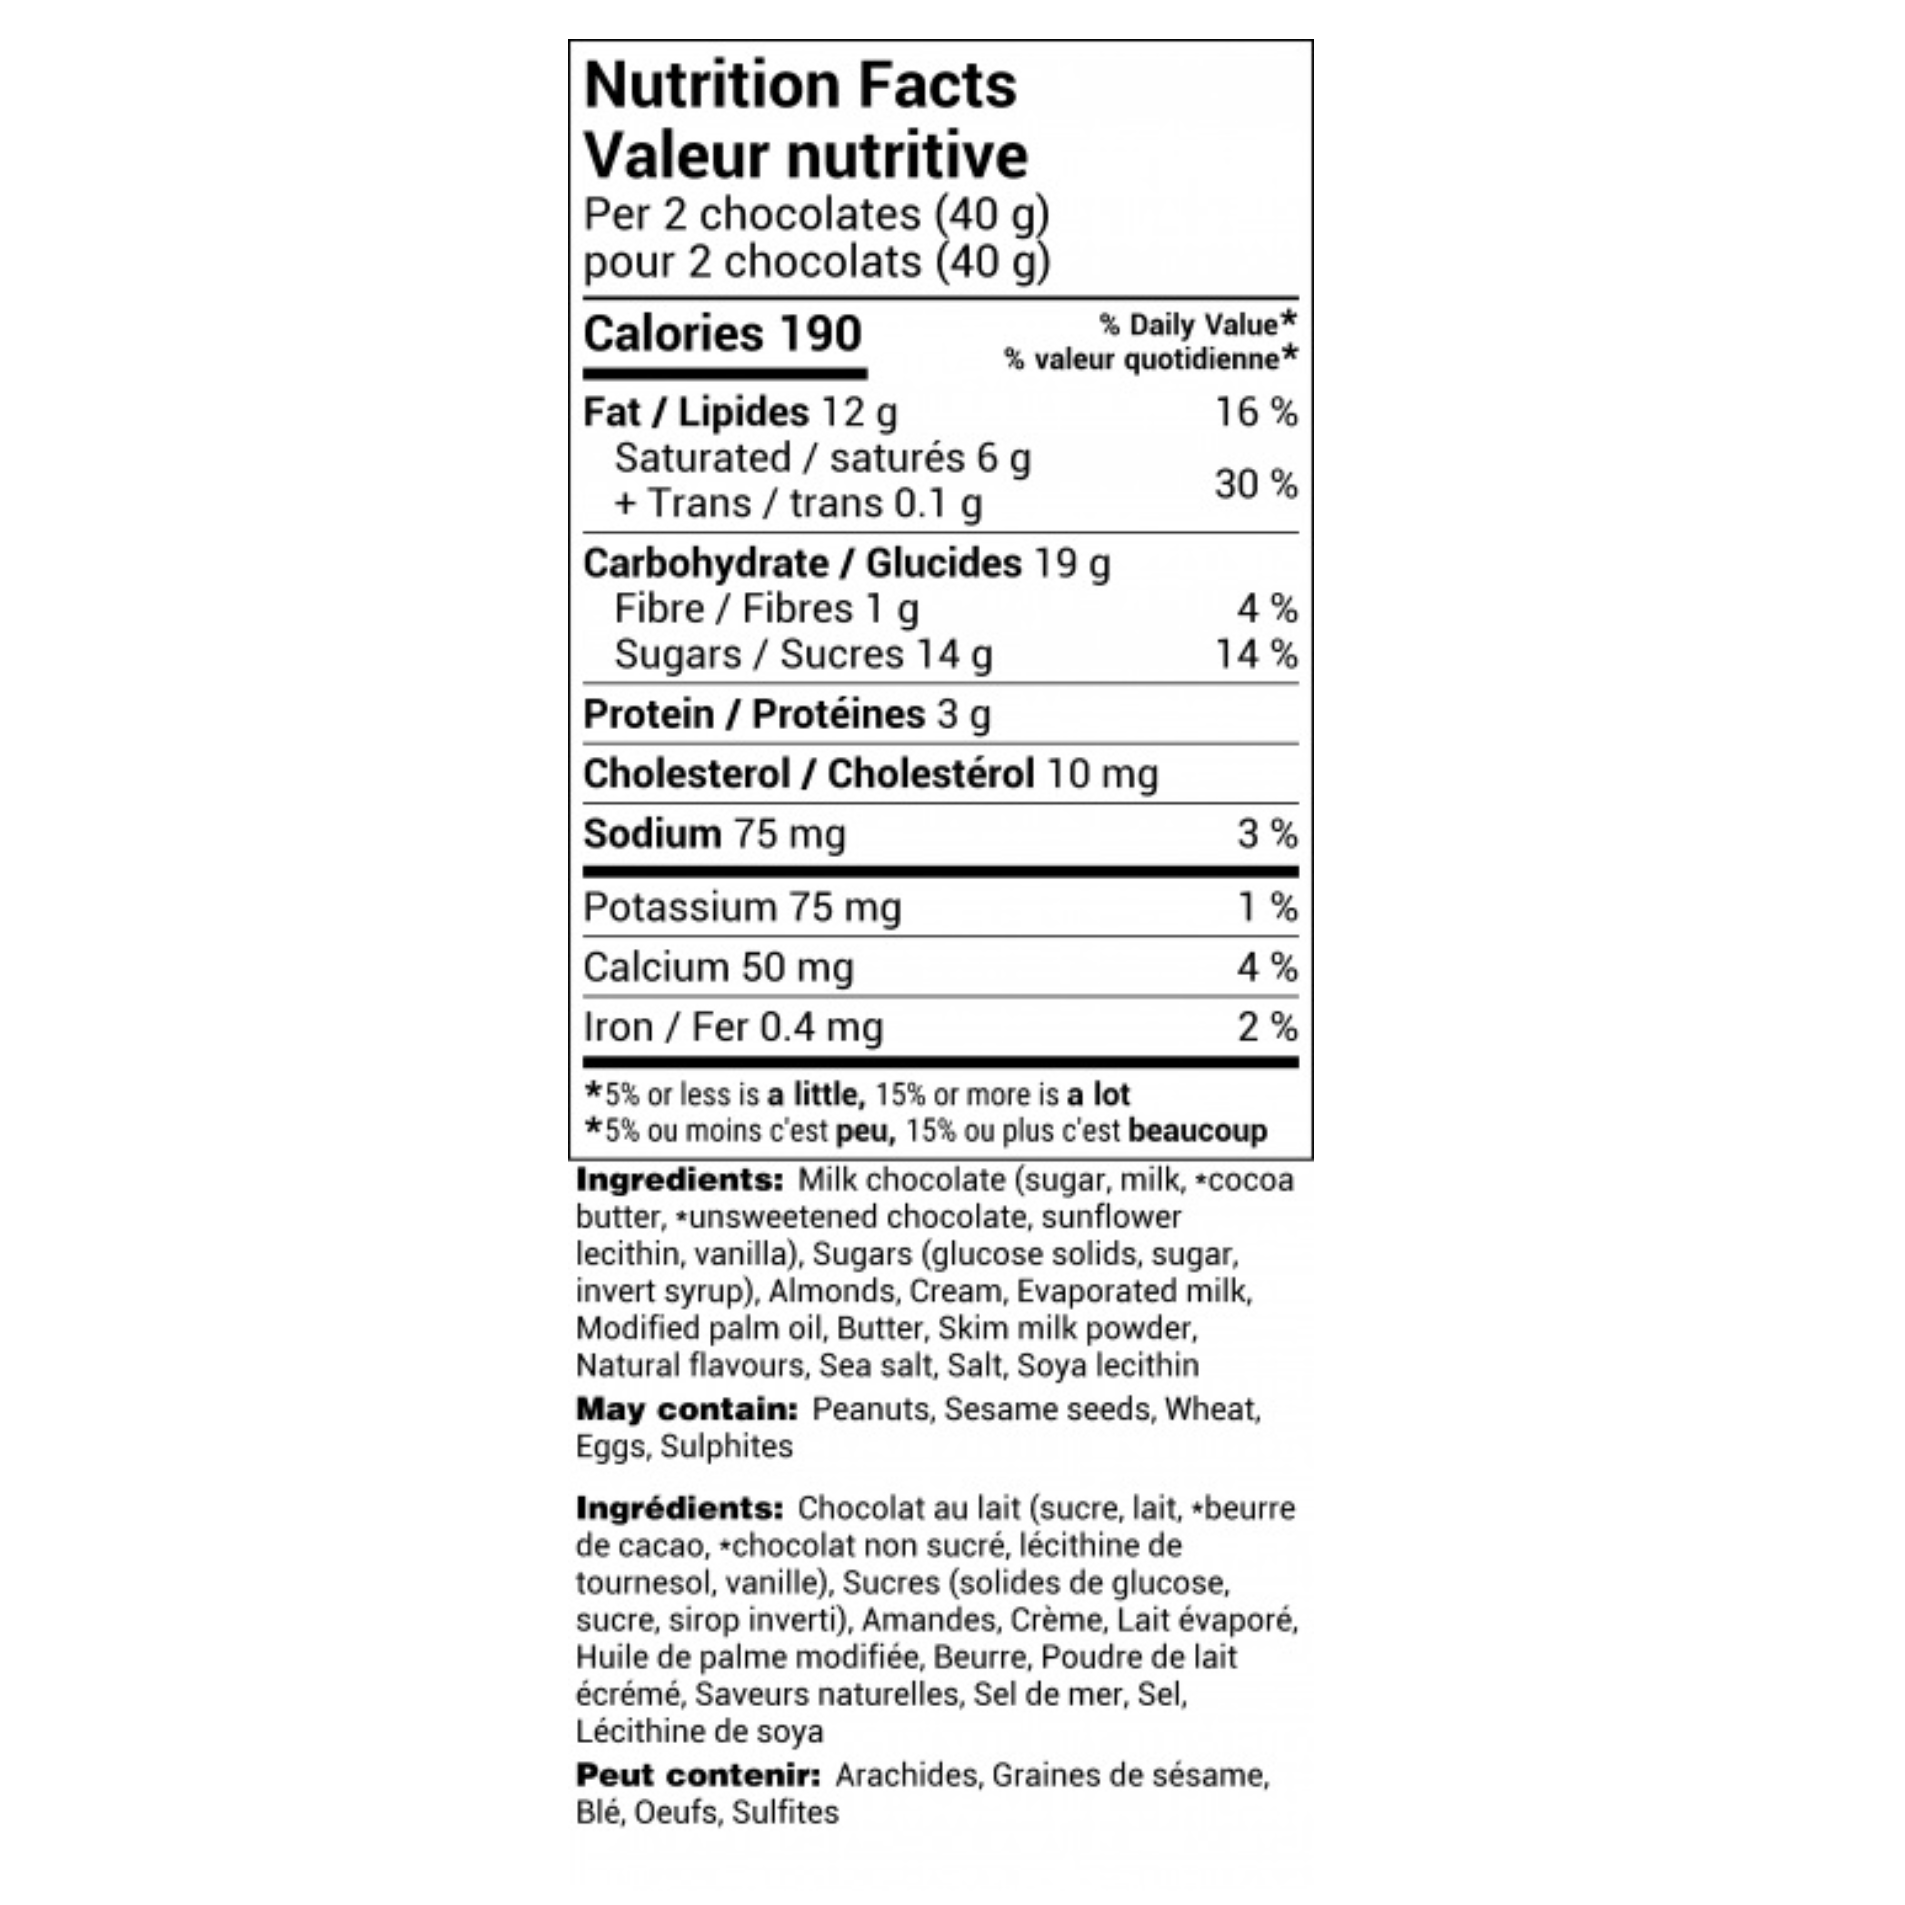 nutritional info for sea salt empress squares by rogers chocolate black writing on white background 